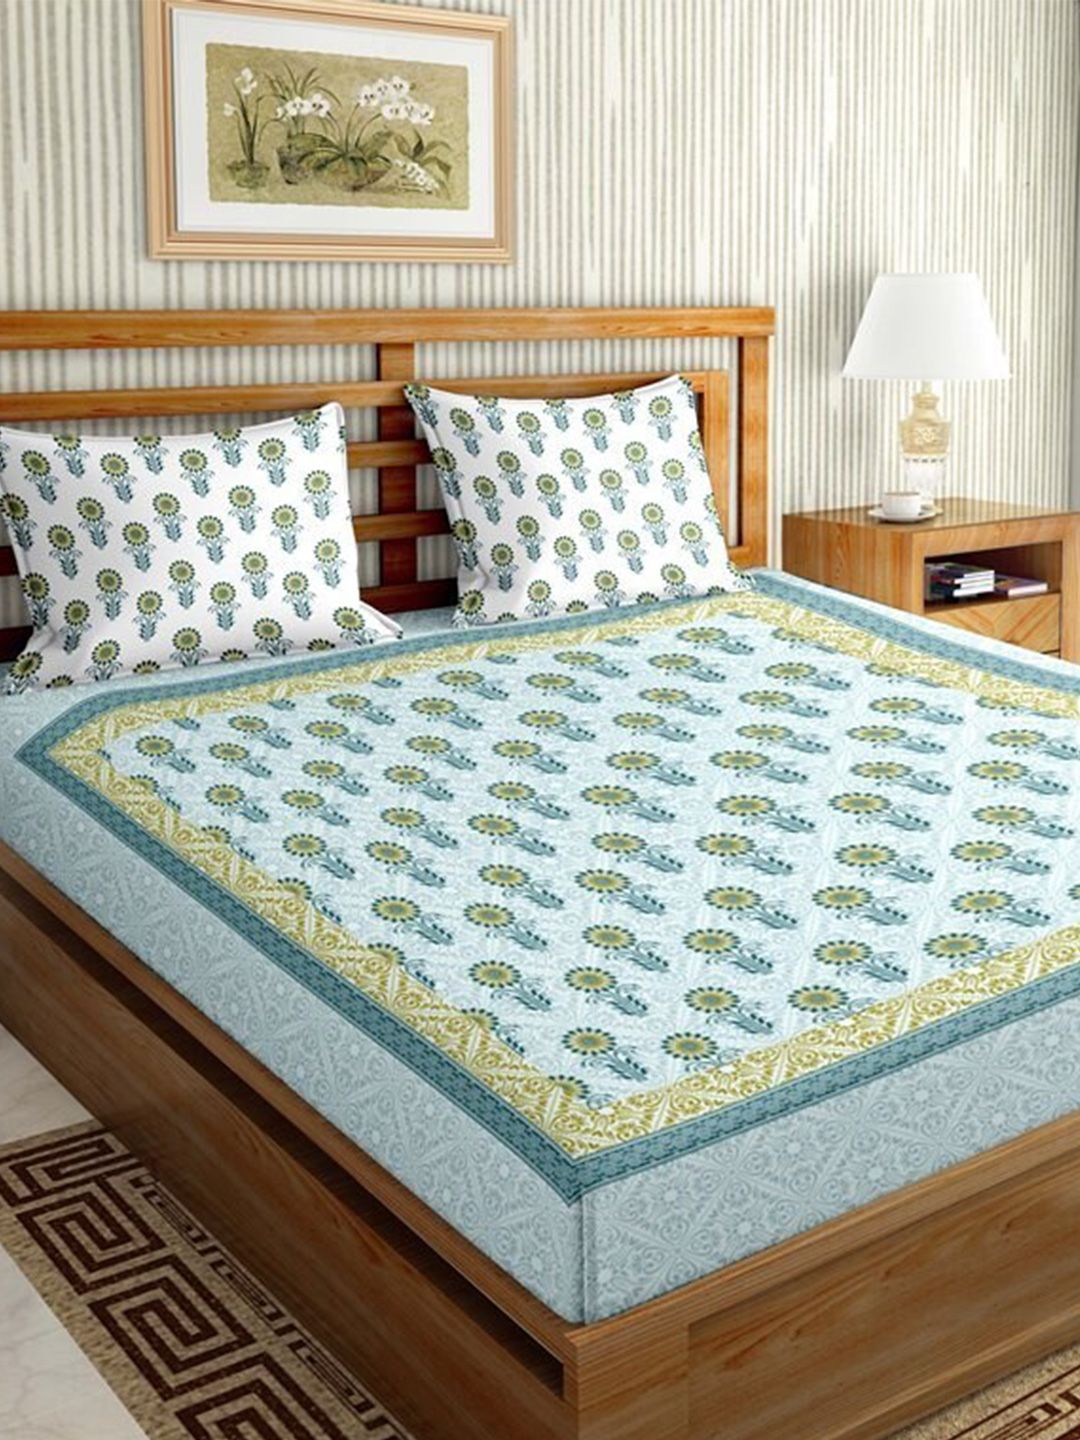 BELLA CASA Blue & White Ethnic Motifs 144 TC Cotton King Bedsheet with 2 Pillow Covers Price in India